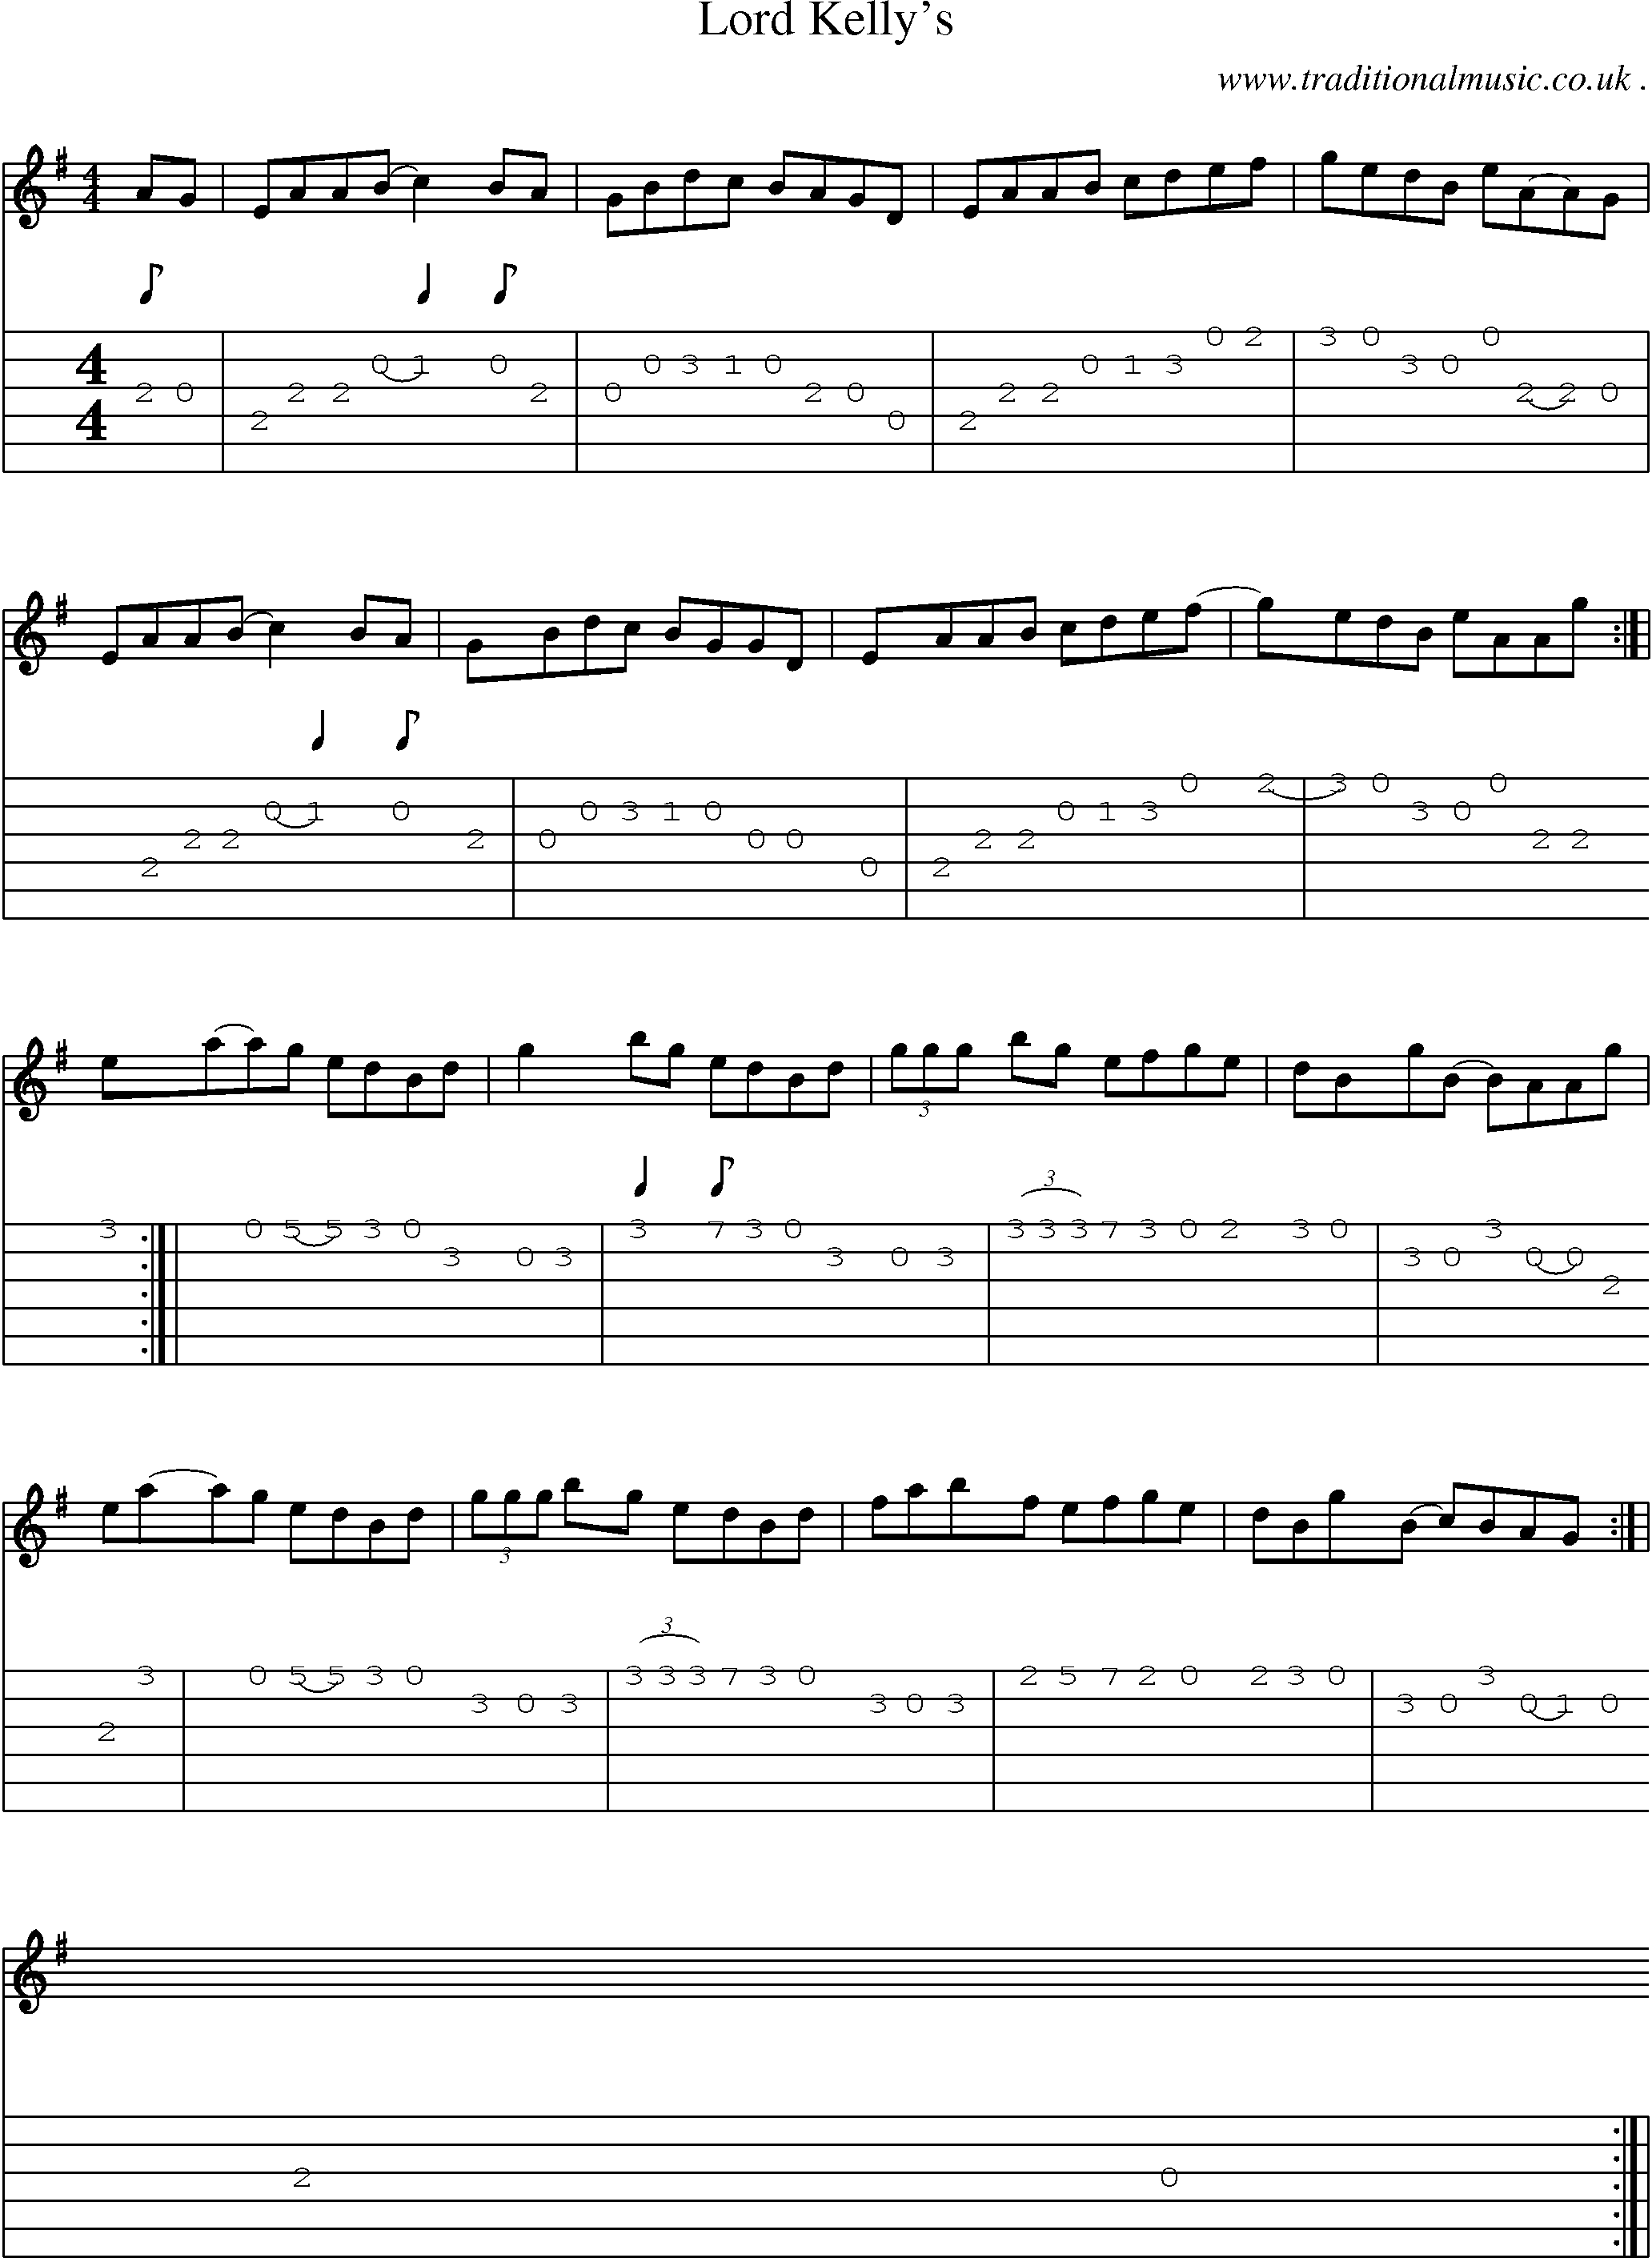 Sheet-music  score, Chords and Guitar Tabs for Lord Kellys